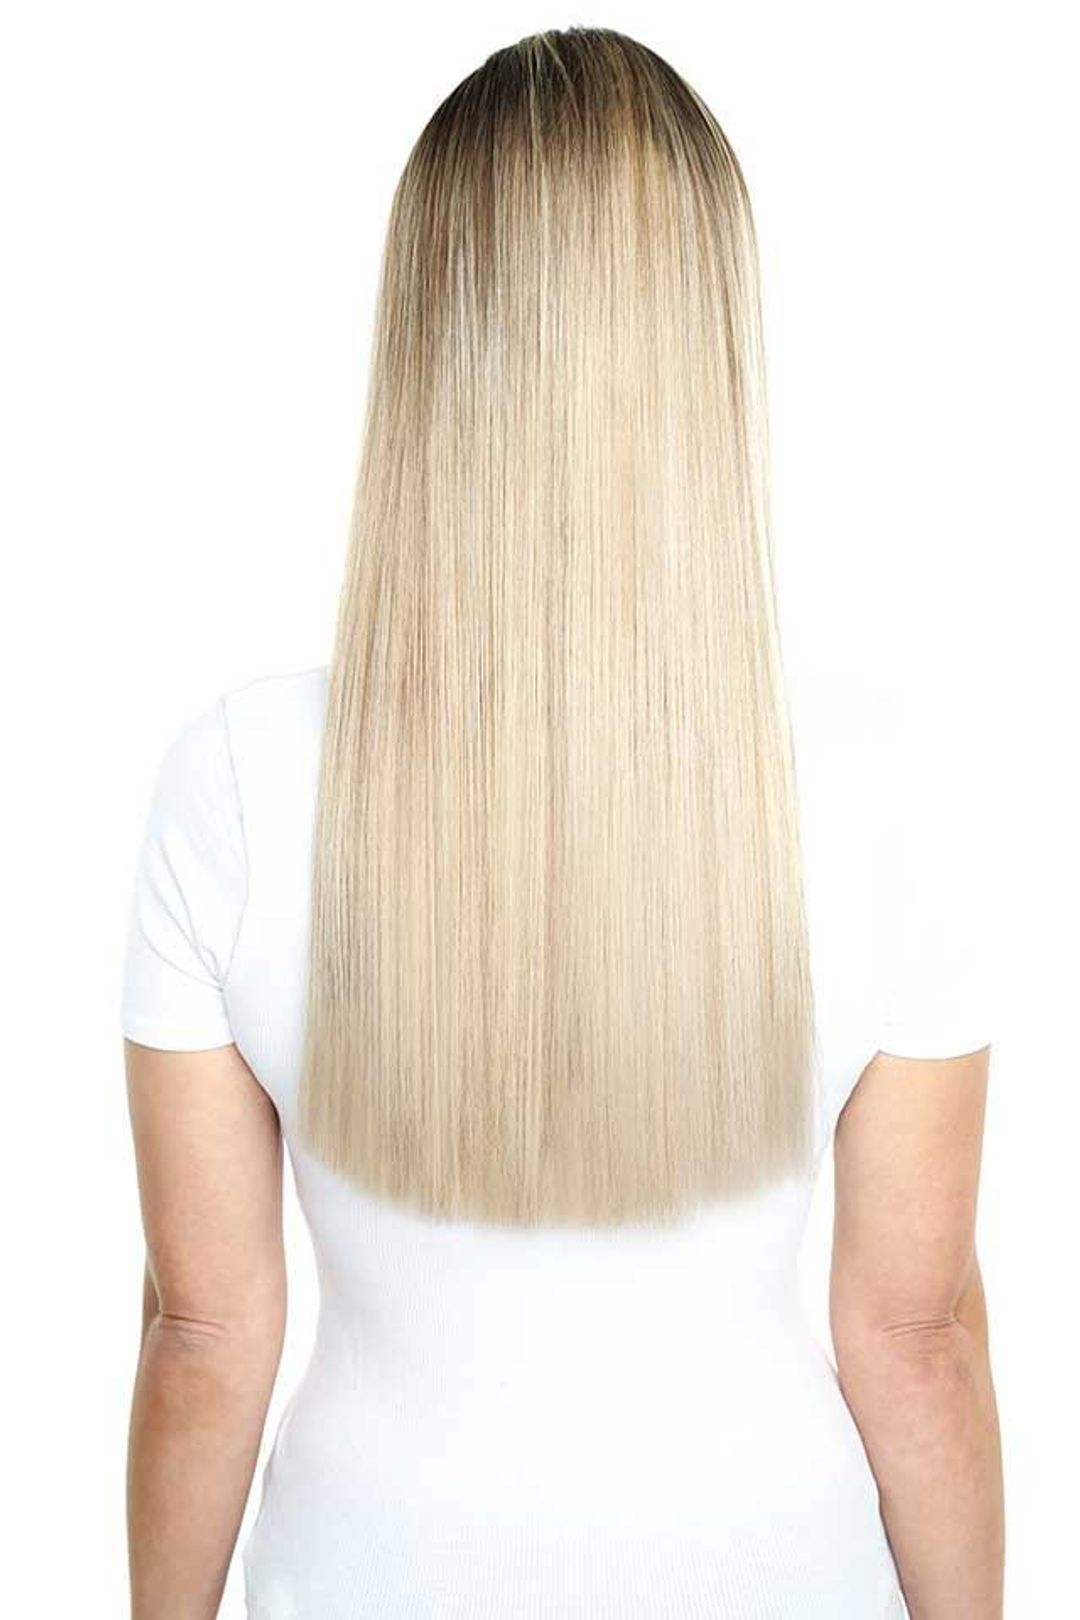 Beauty Works Celebrity Choice Weft Hair Extensions - Hottoffee,20"